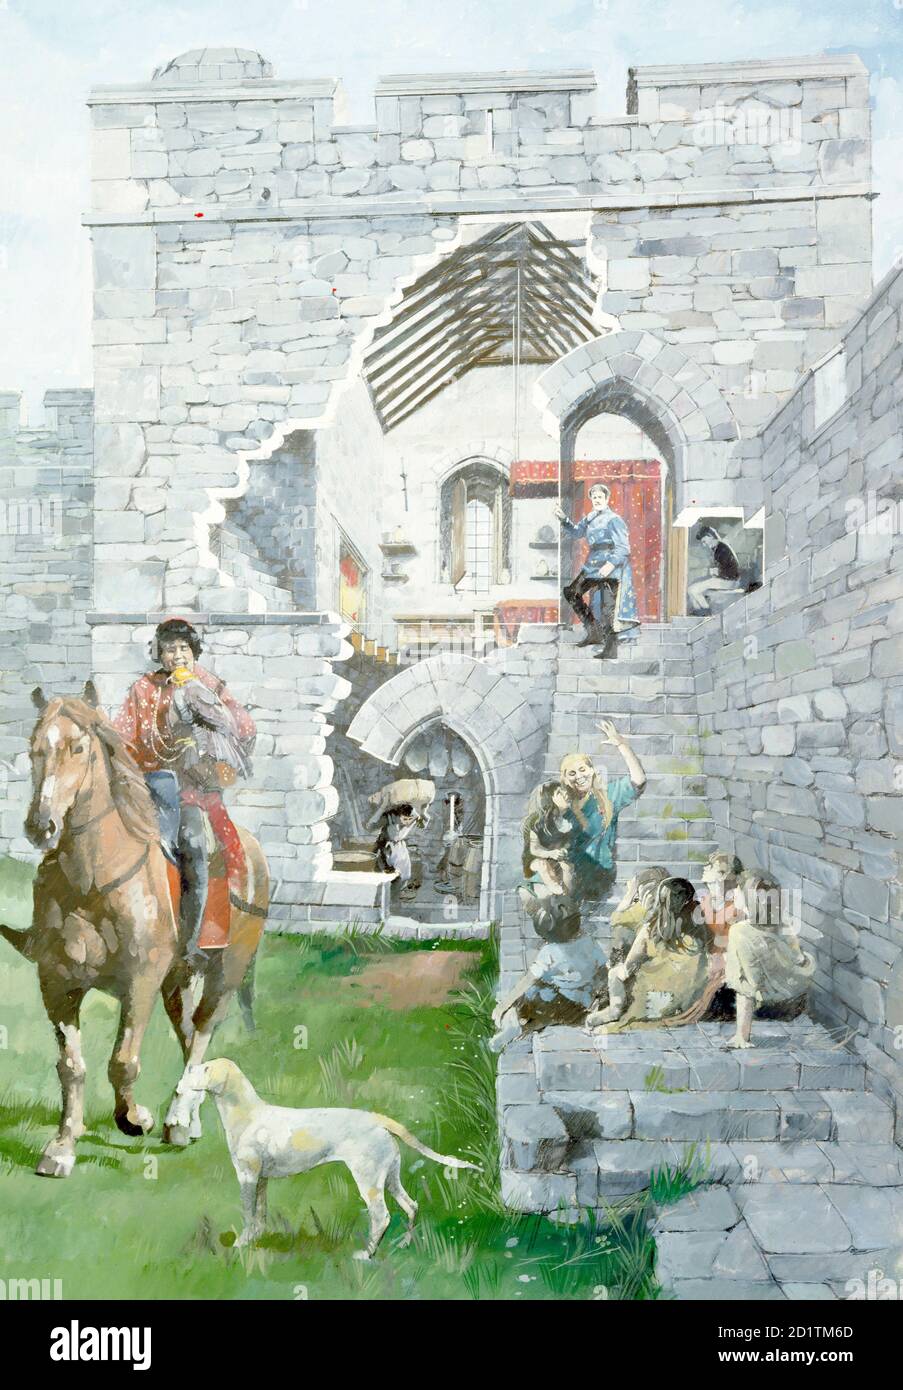 PICKERING CASTLE, North Yorkshire. Cutaway section of the tower. Reconstruction drawing by Ivan Lapper. Stock Photo